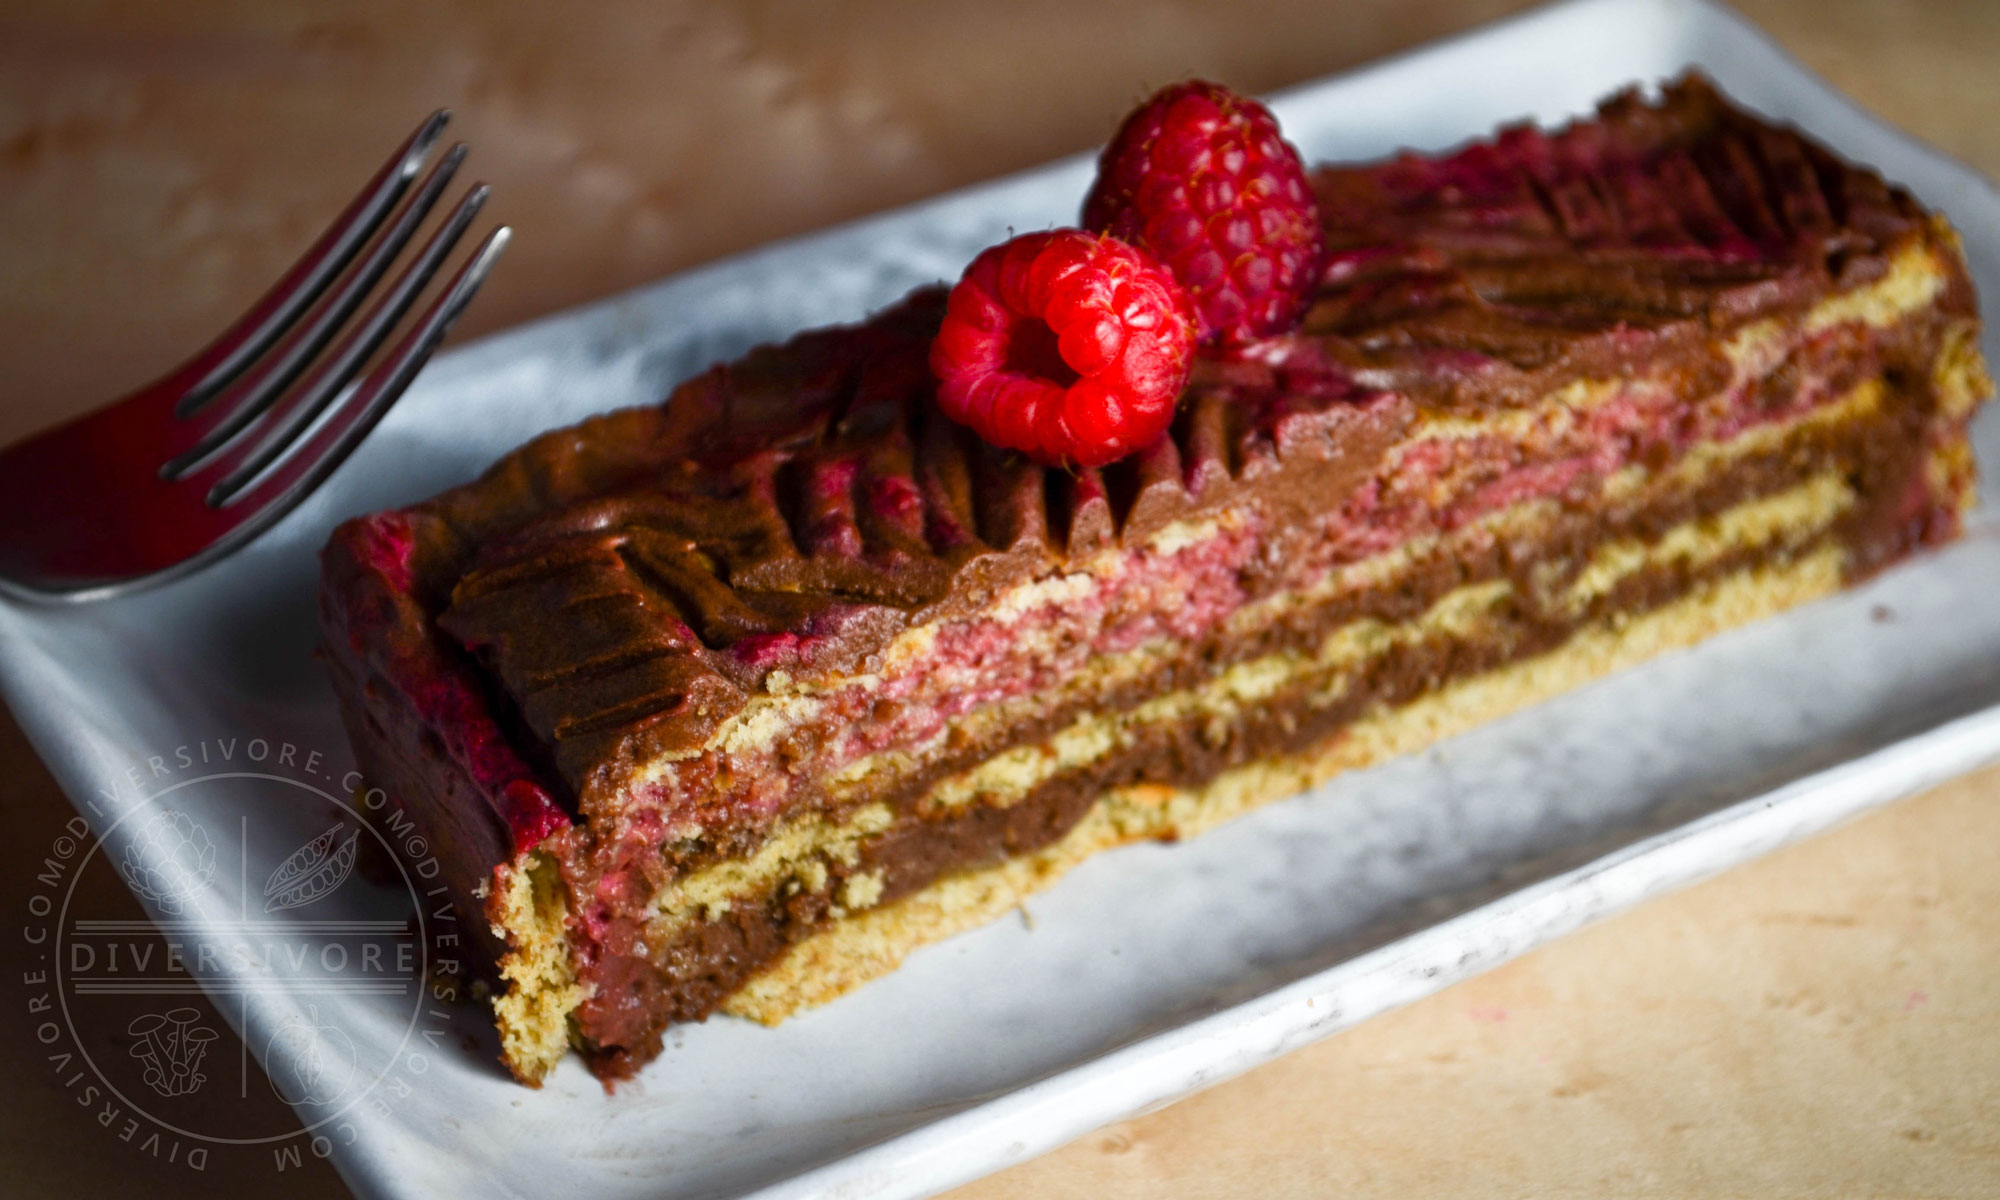 Featured image for “Chocolate Raspberry Rose Icebox Cake”